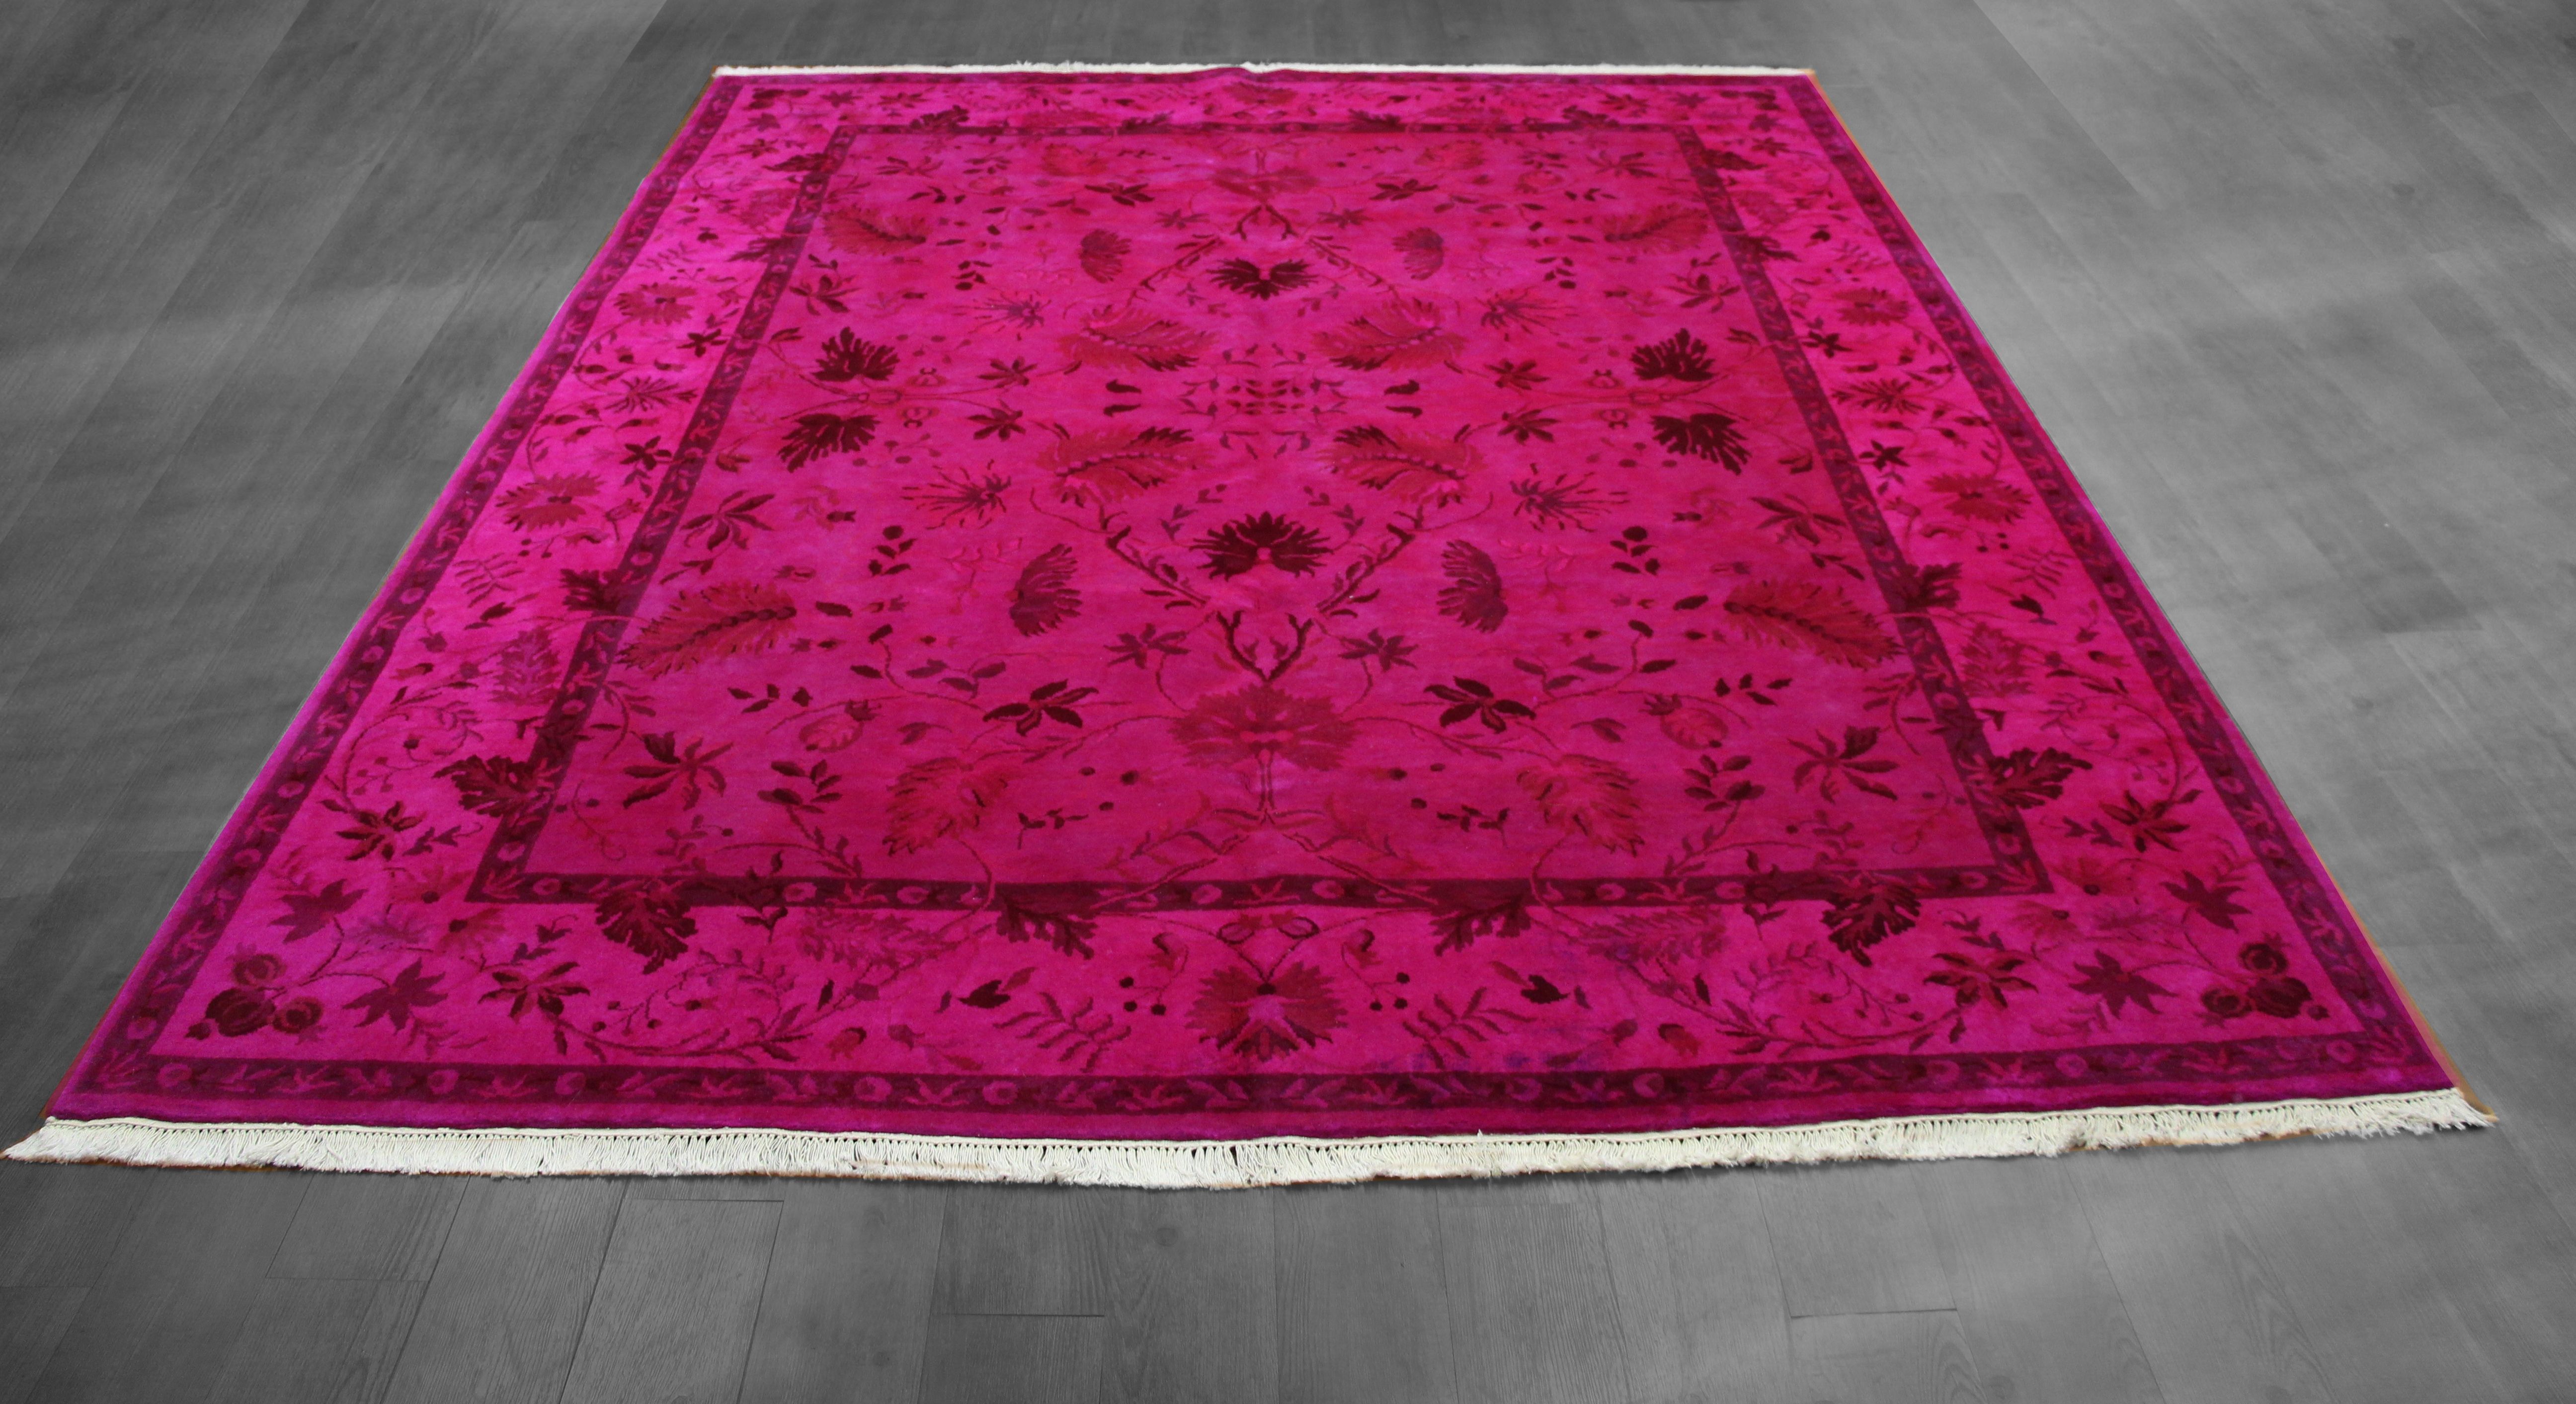 Hot Pink Rugs Persian Rug Sale Small Throw Rugs Manual 09 Intended For Fuschia Pink Carpets (View 9 of 15)